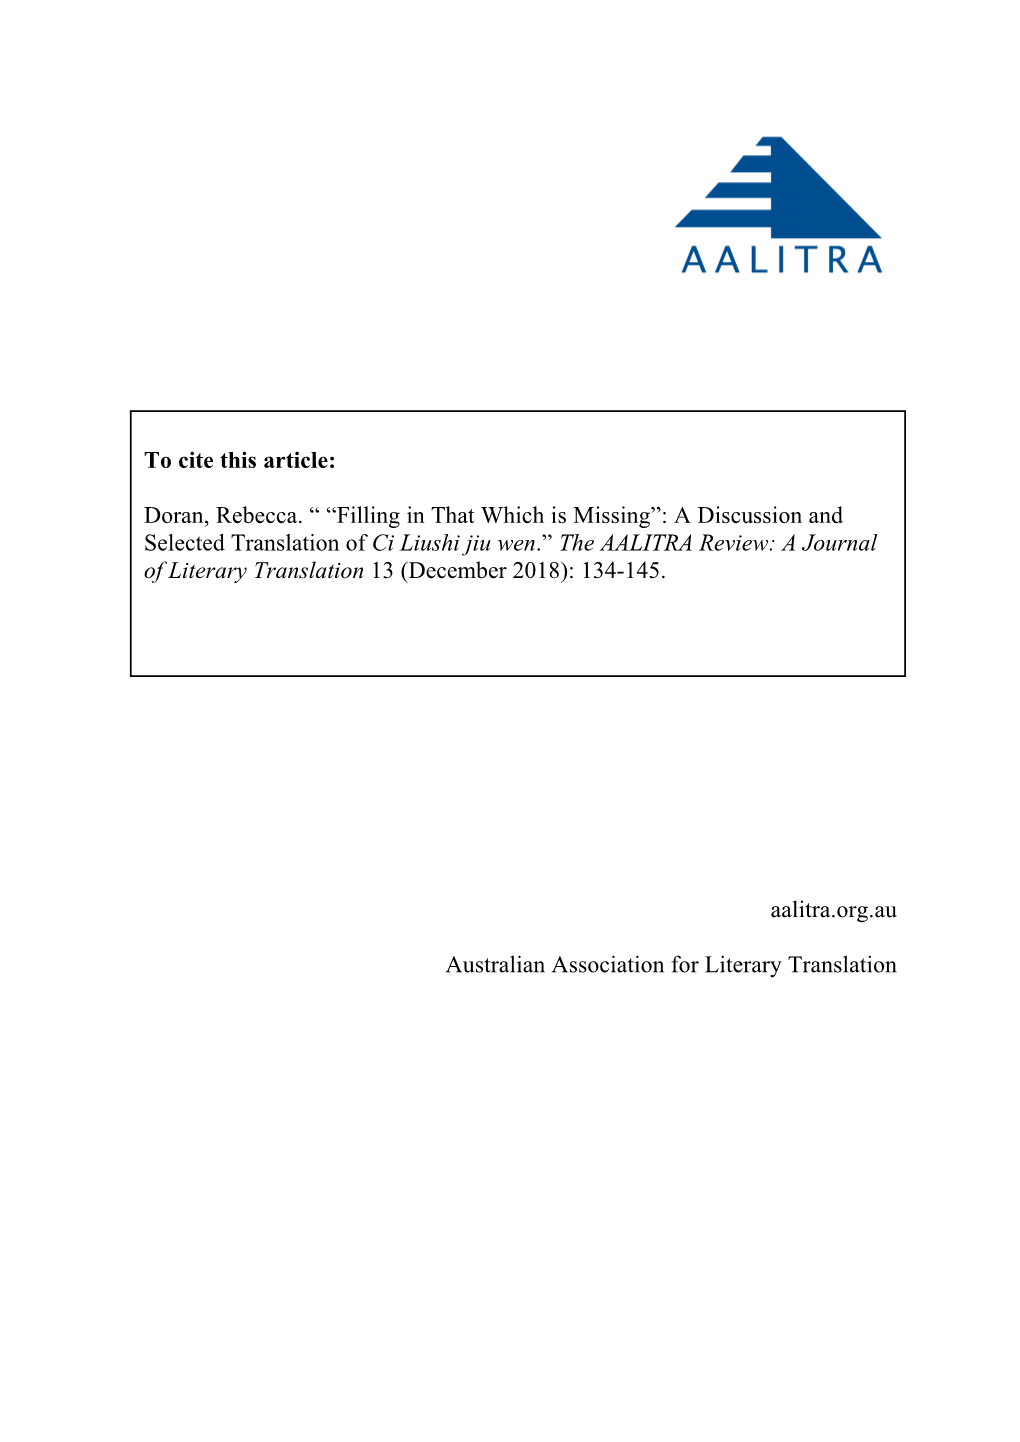 The AALITRA Review: a Journal of Literary Translation 13 (December 2018): 134-145